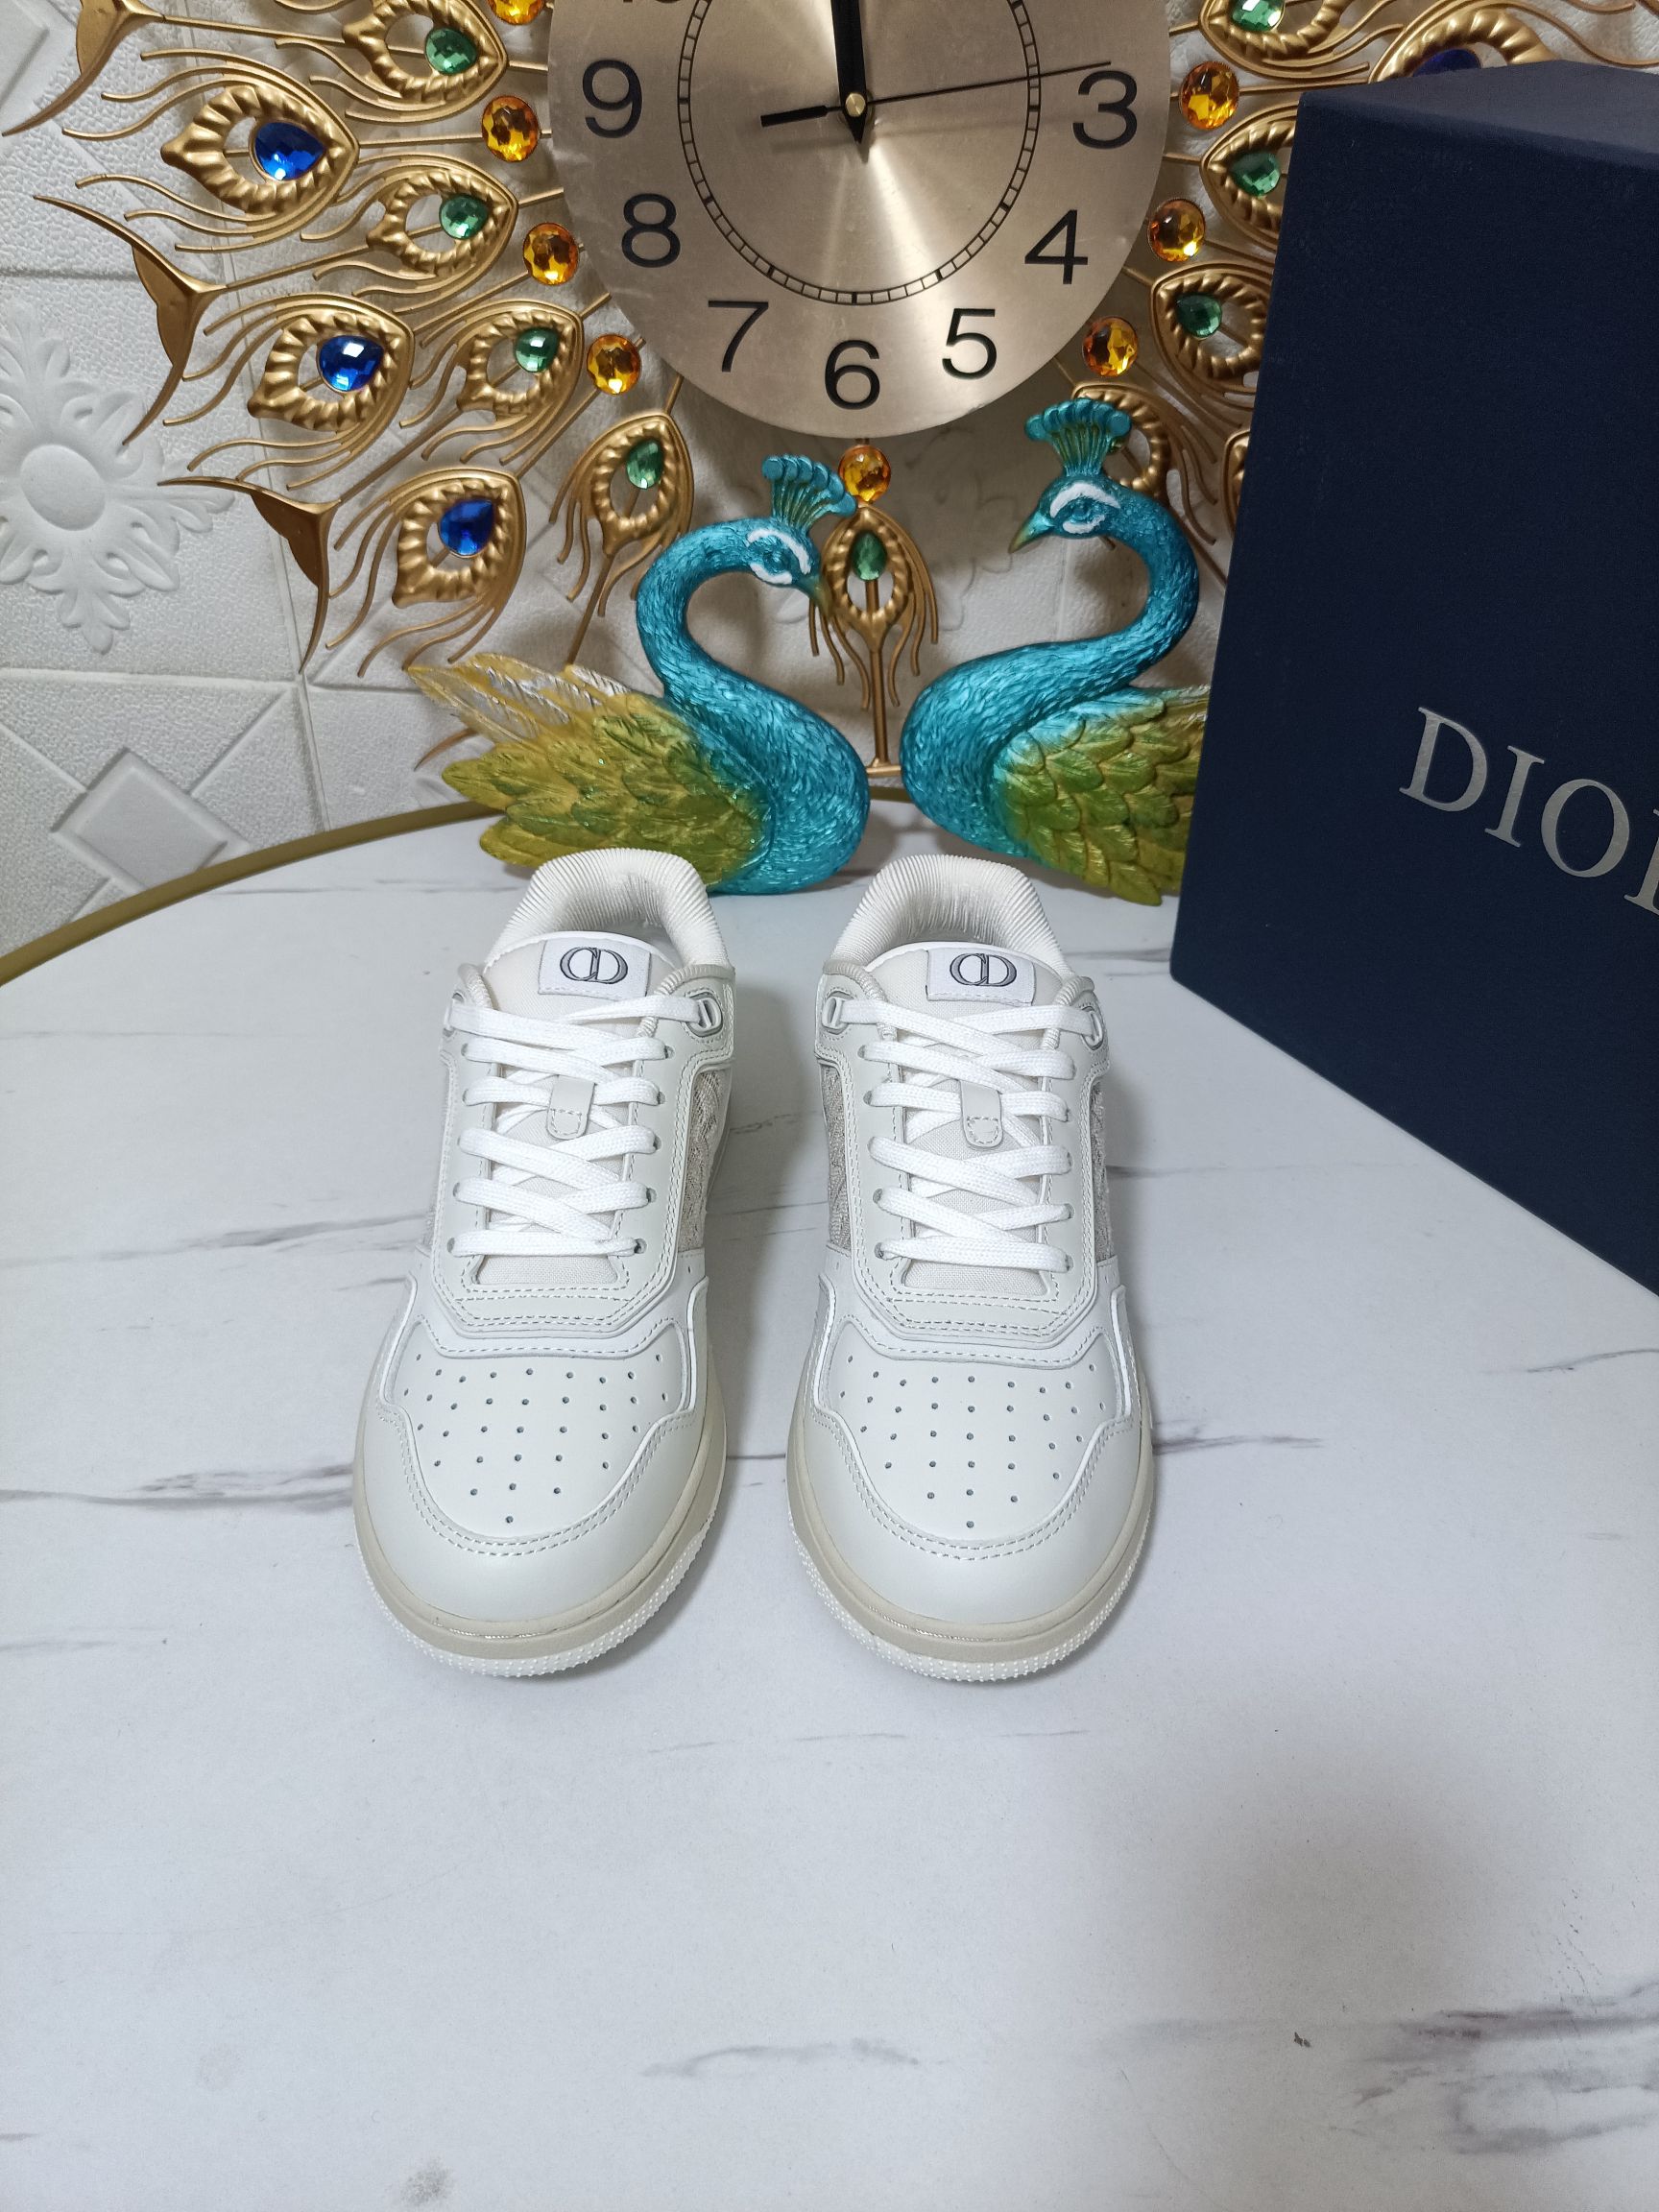 Dior couple high top B27 casual sneakers